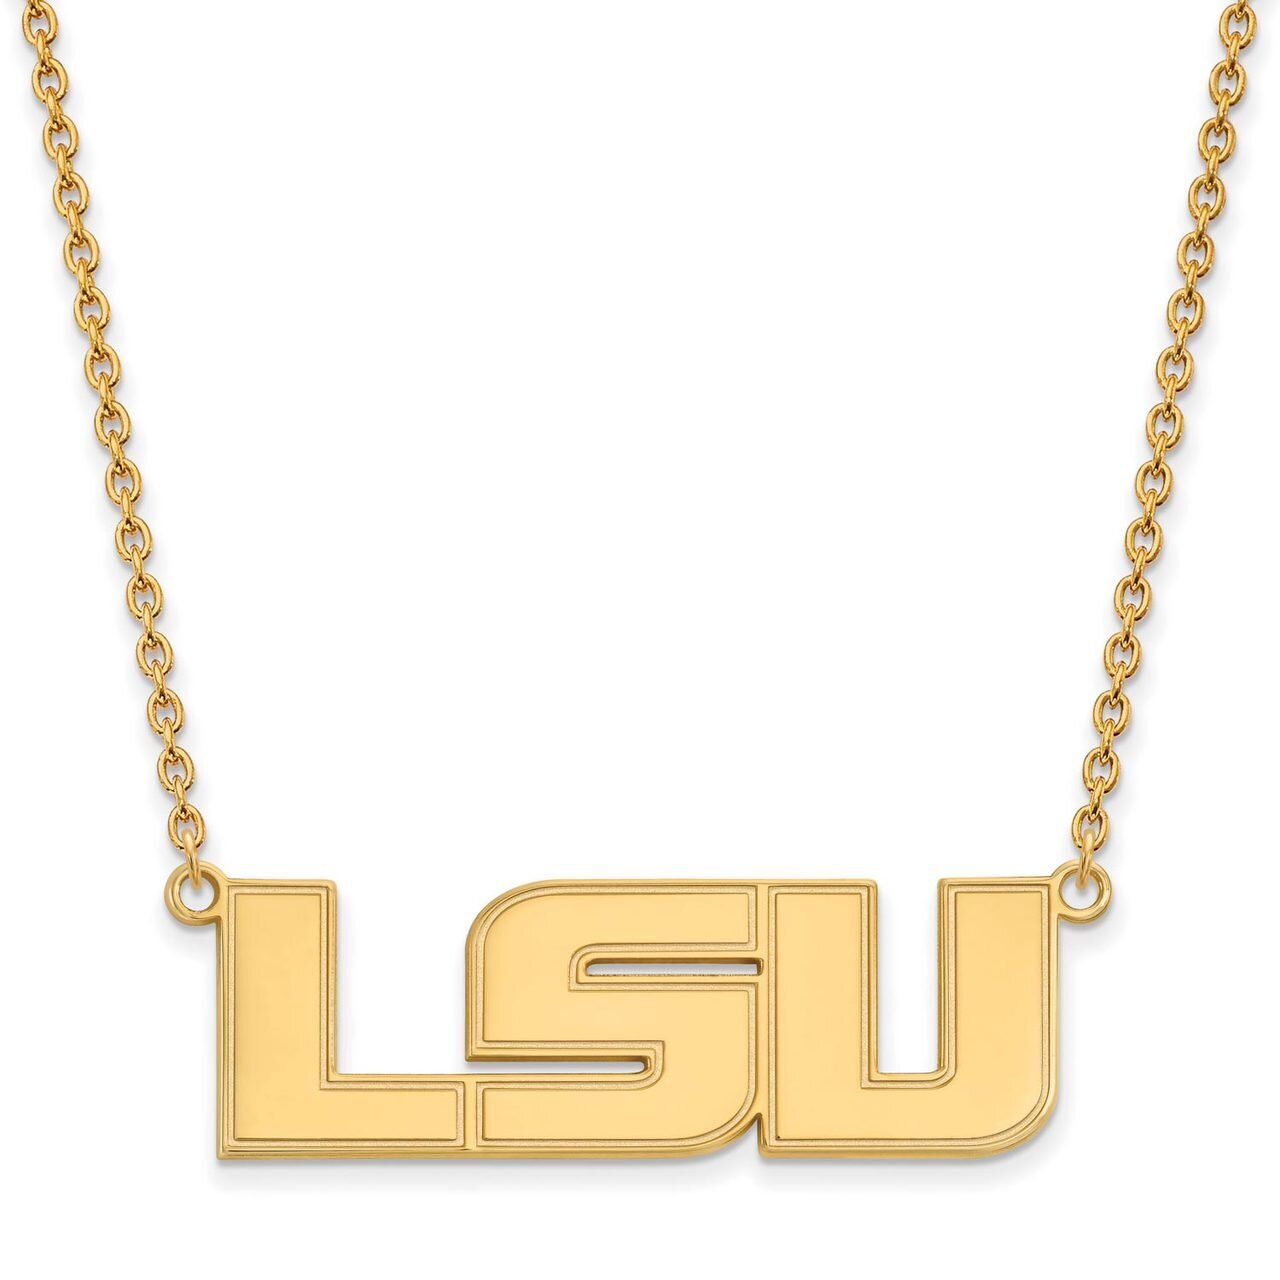 Louisiana State University Large Pendant with Chain Necklace 14k Yellow Gold 4Y010LSU-18